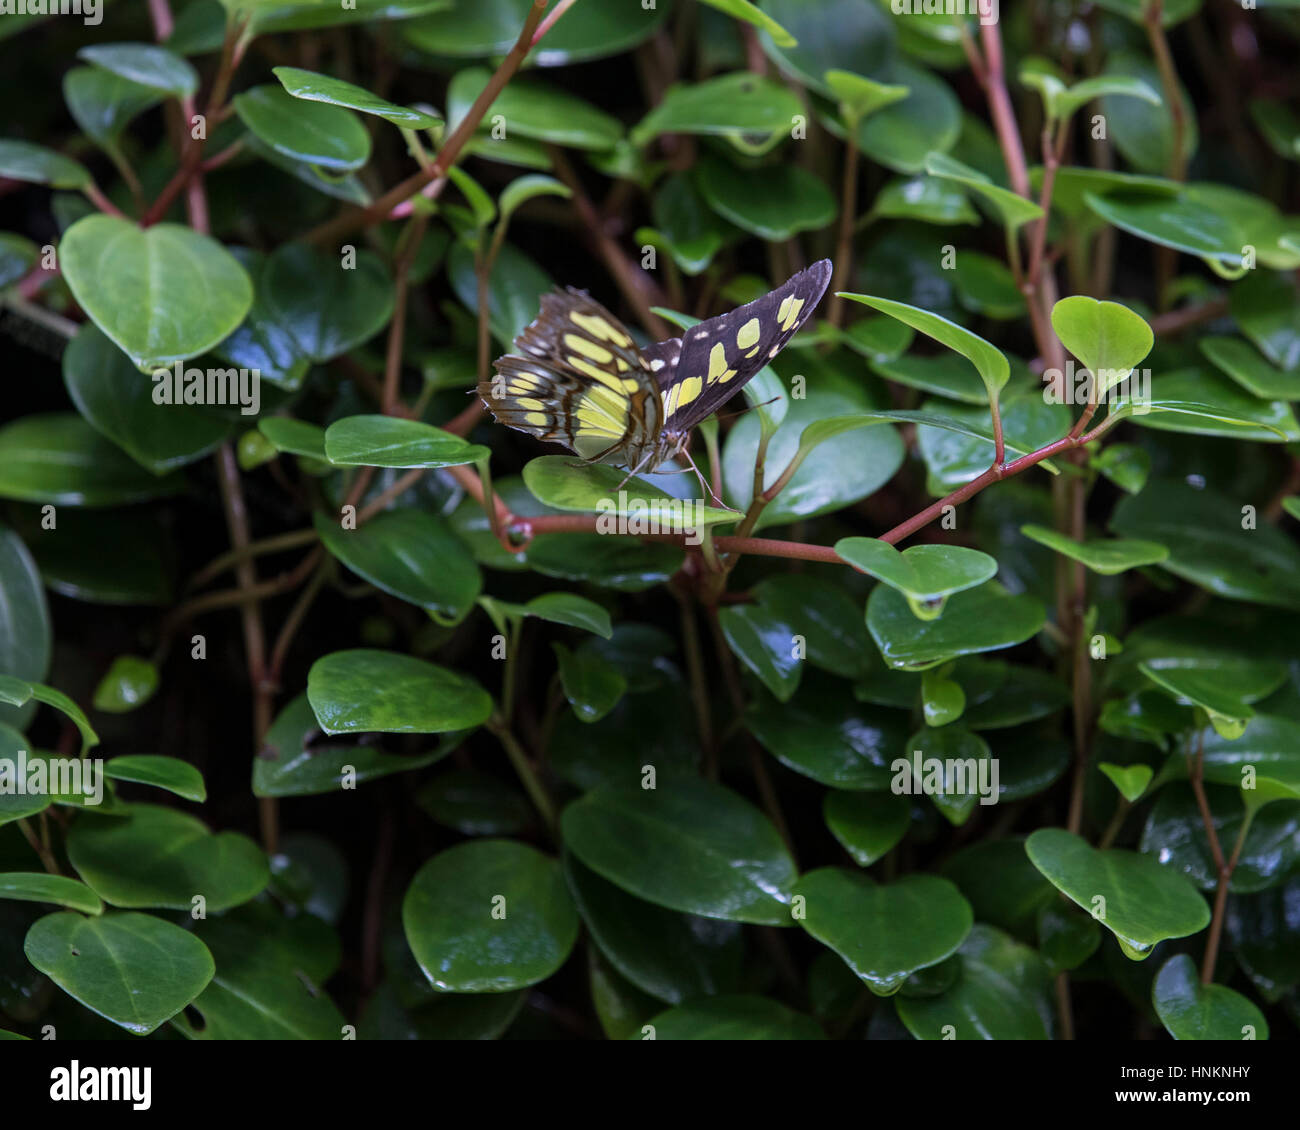 The Malachite neotropical butterfly resting on foliage Stock Photo